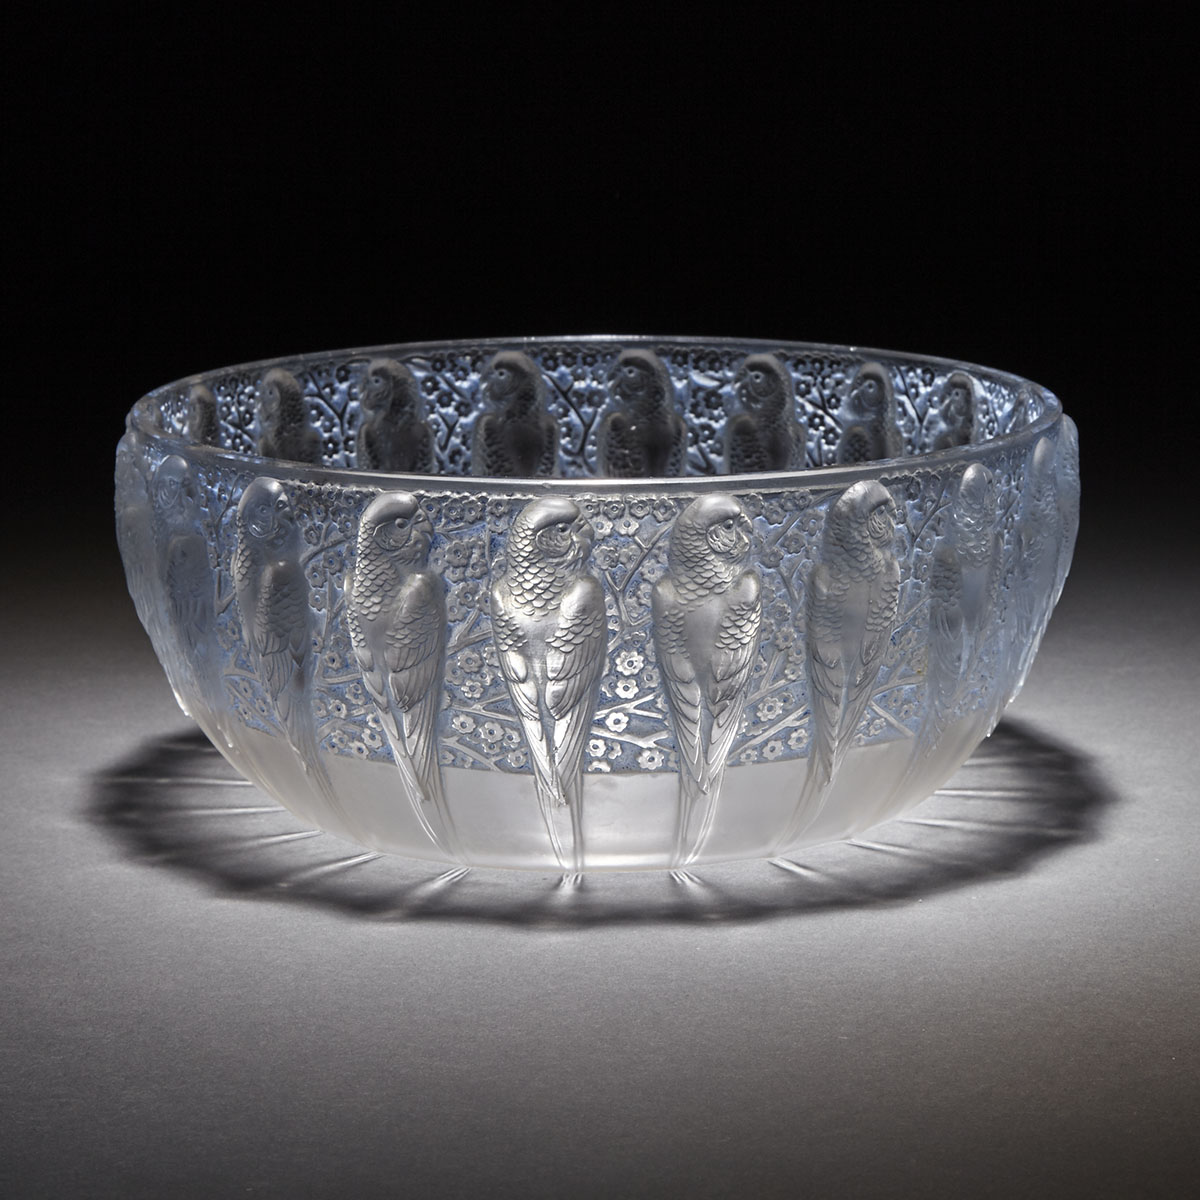 ‘Perruches’, Lalique Frosted and Blue Enameled Glass Bowl, 1930s